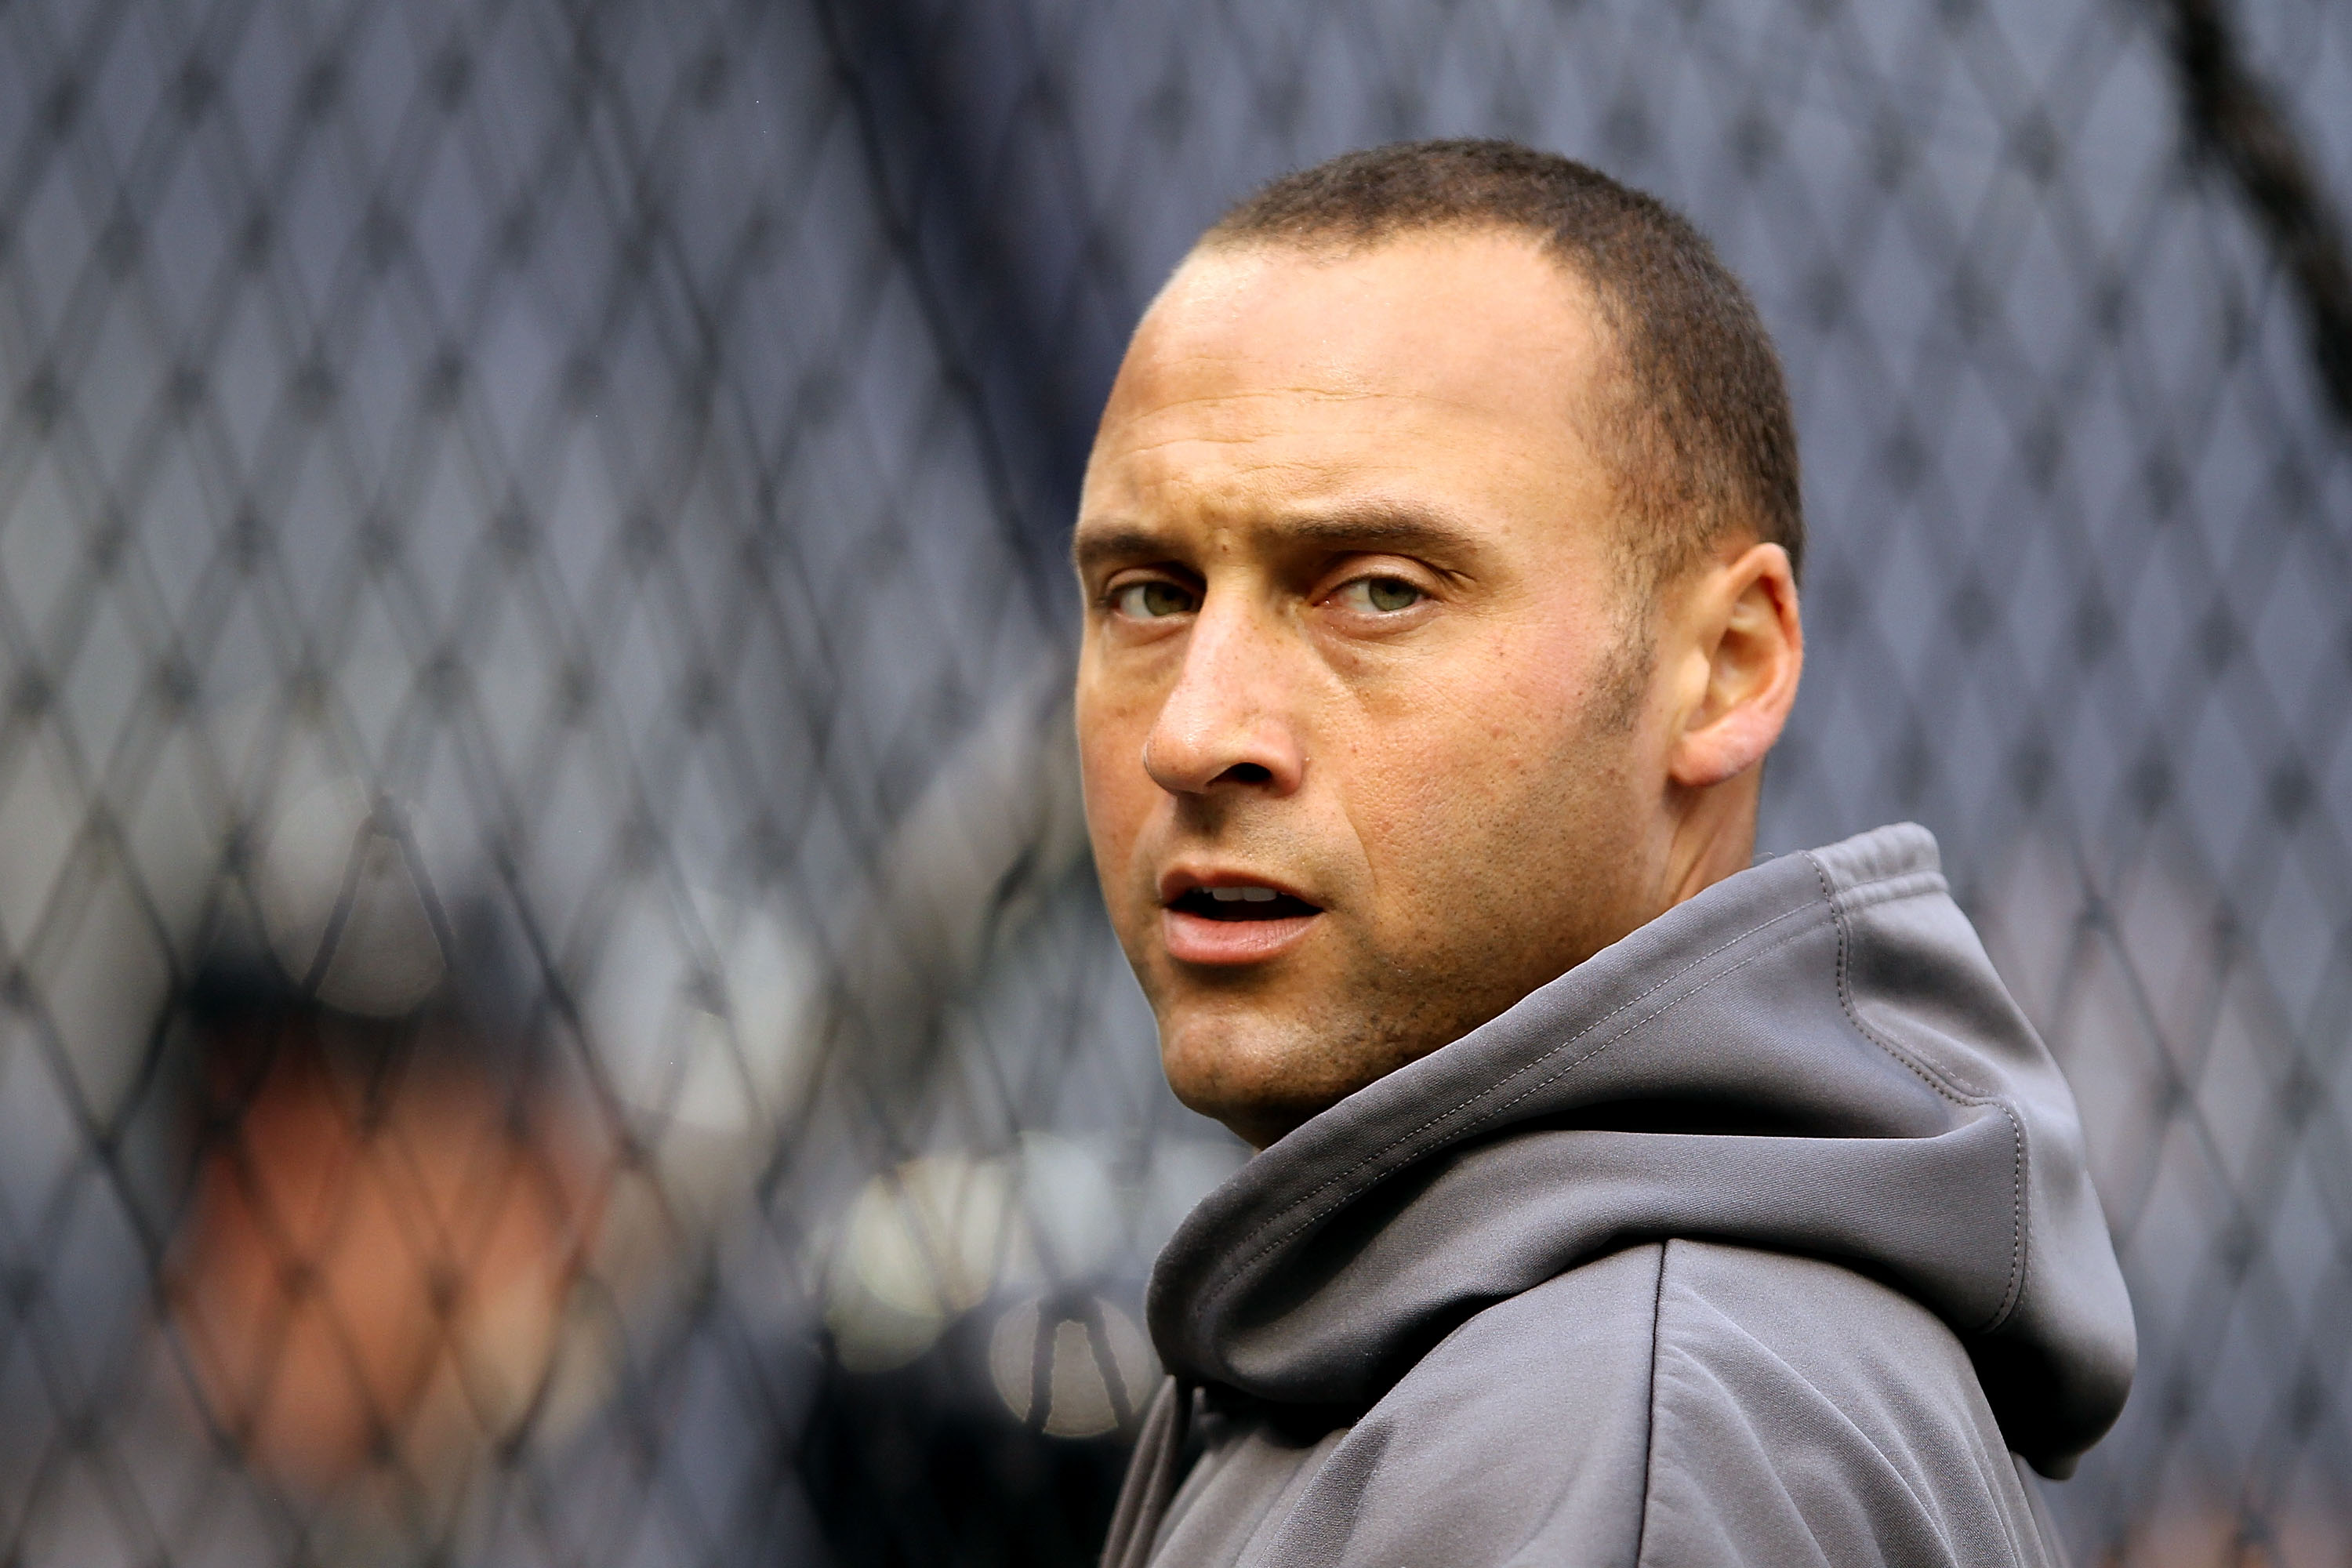 NEW YORK - OCTOBER 20:  Derek Jeter #2 of the New York Yankees looks on during batting practice against the Texas Rangers in Game Five of the ALCS during the 2010 MLB Playoffs at Yankee Stadium on October 20, 2010 in the Bronx borough of New York City.  (